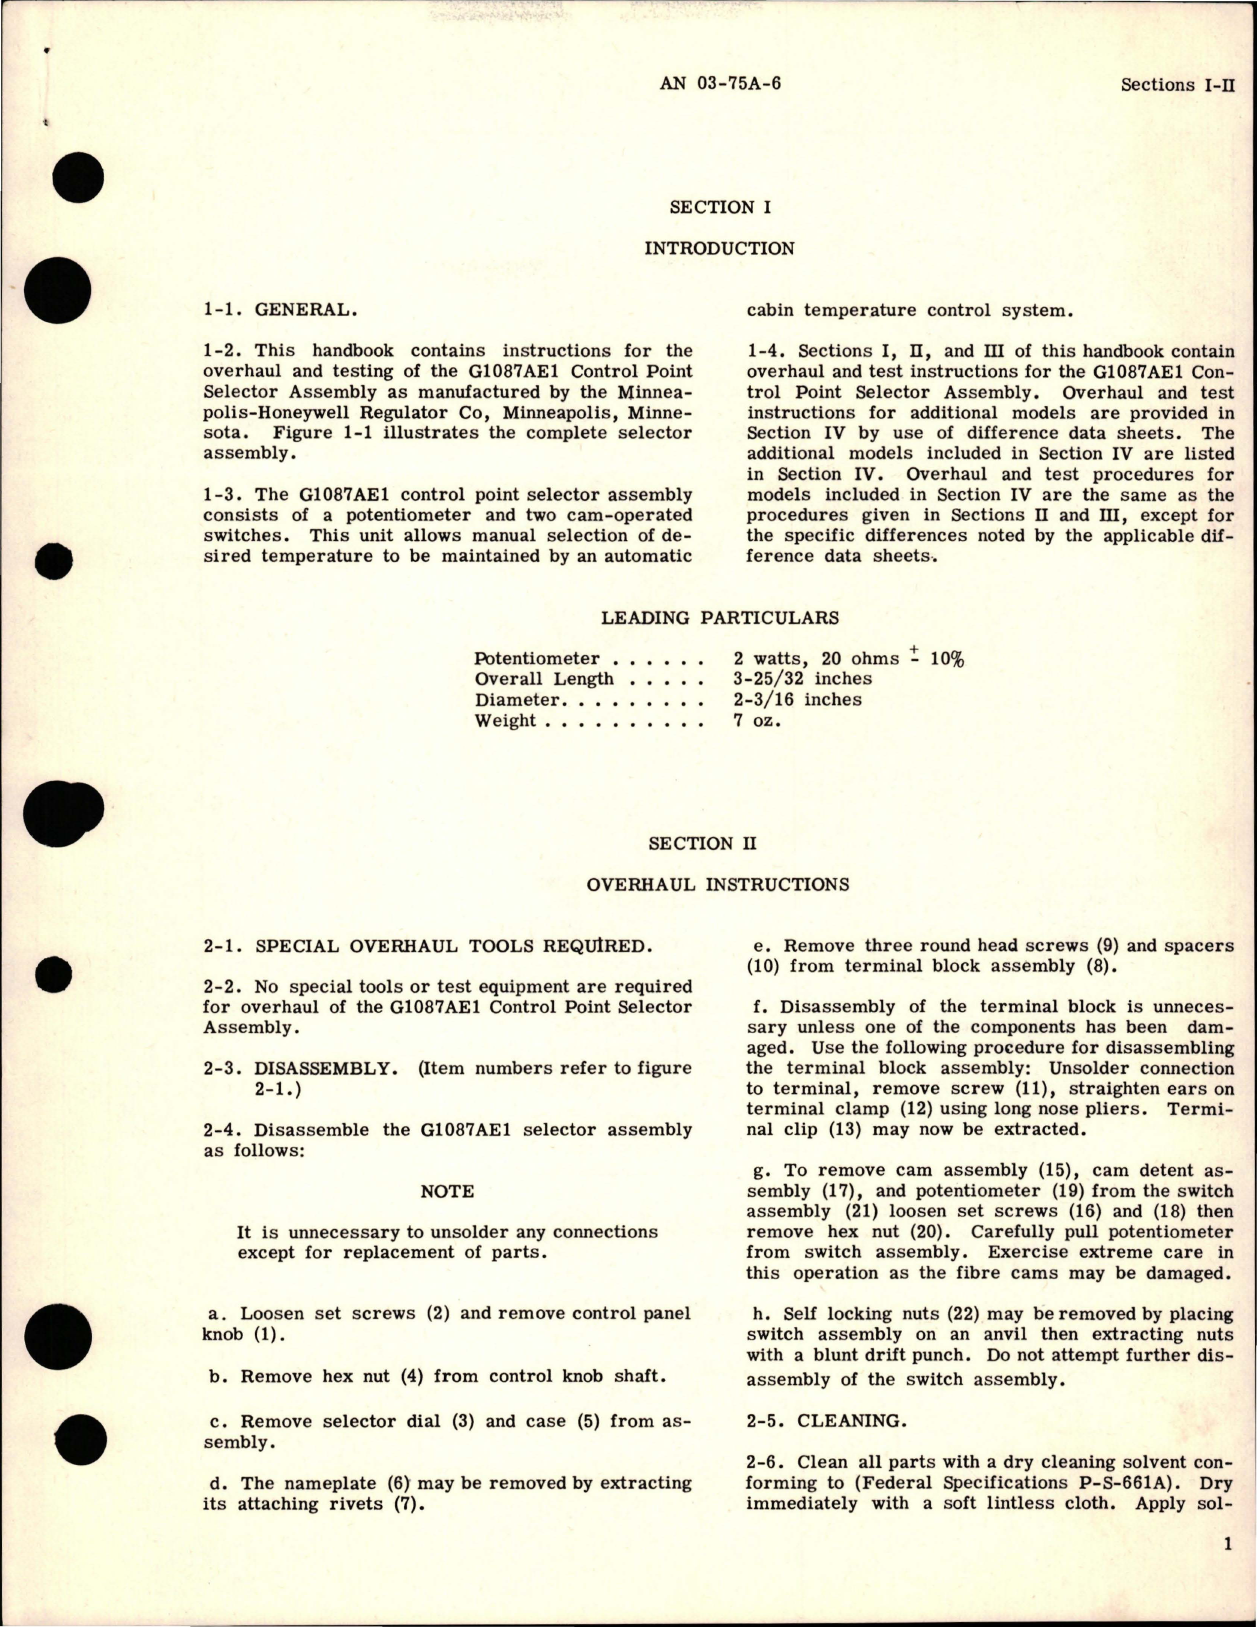 Sample page 5 from AirCorps Library document: Overhaul Instructions for Control Point Selector - Types G1087AE1 and G1087A2